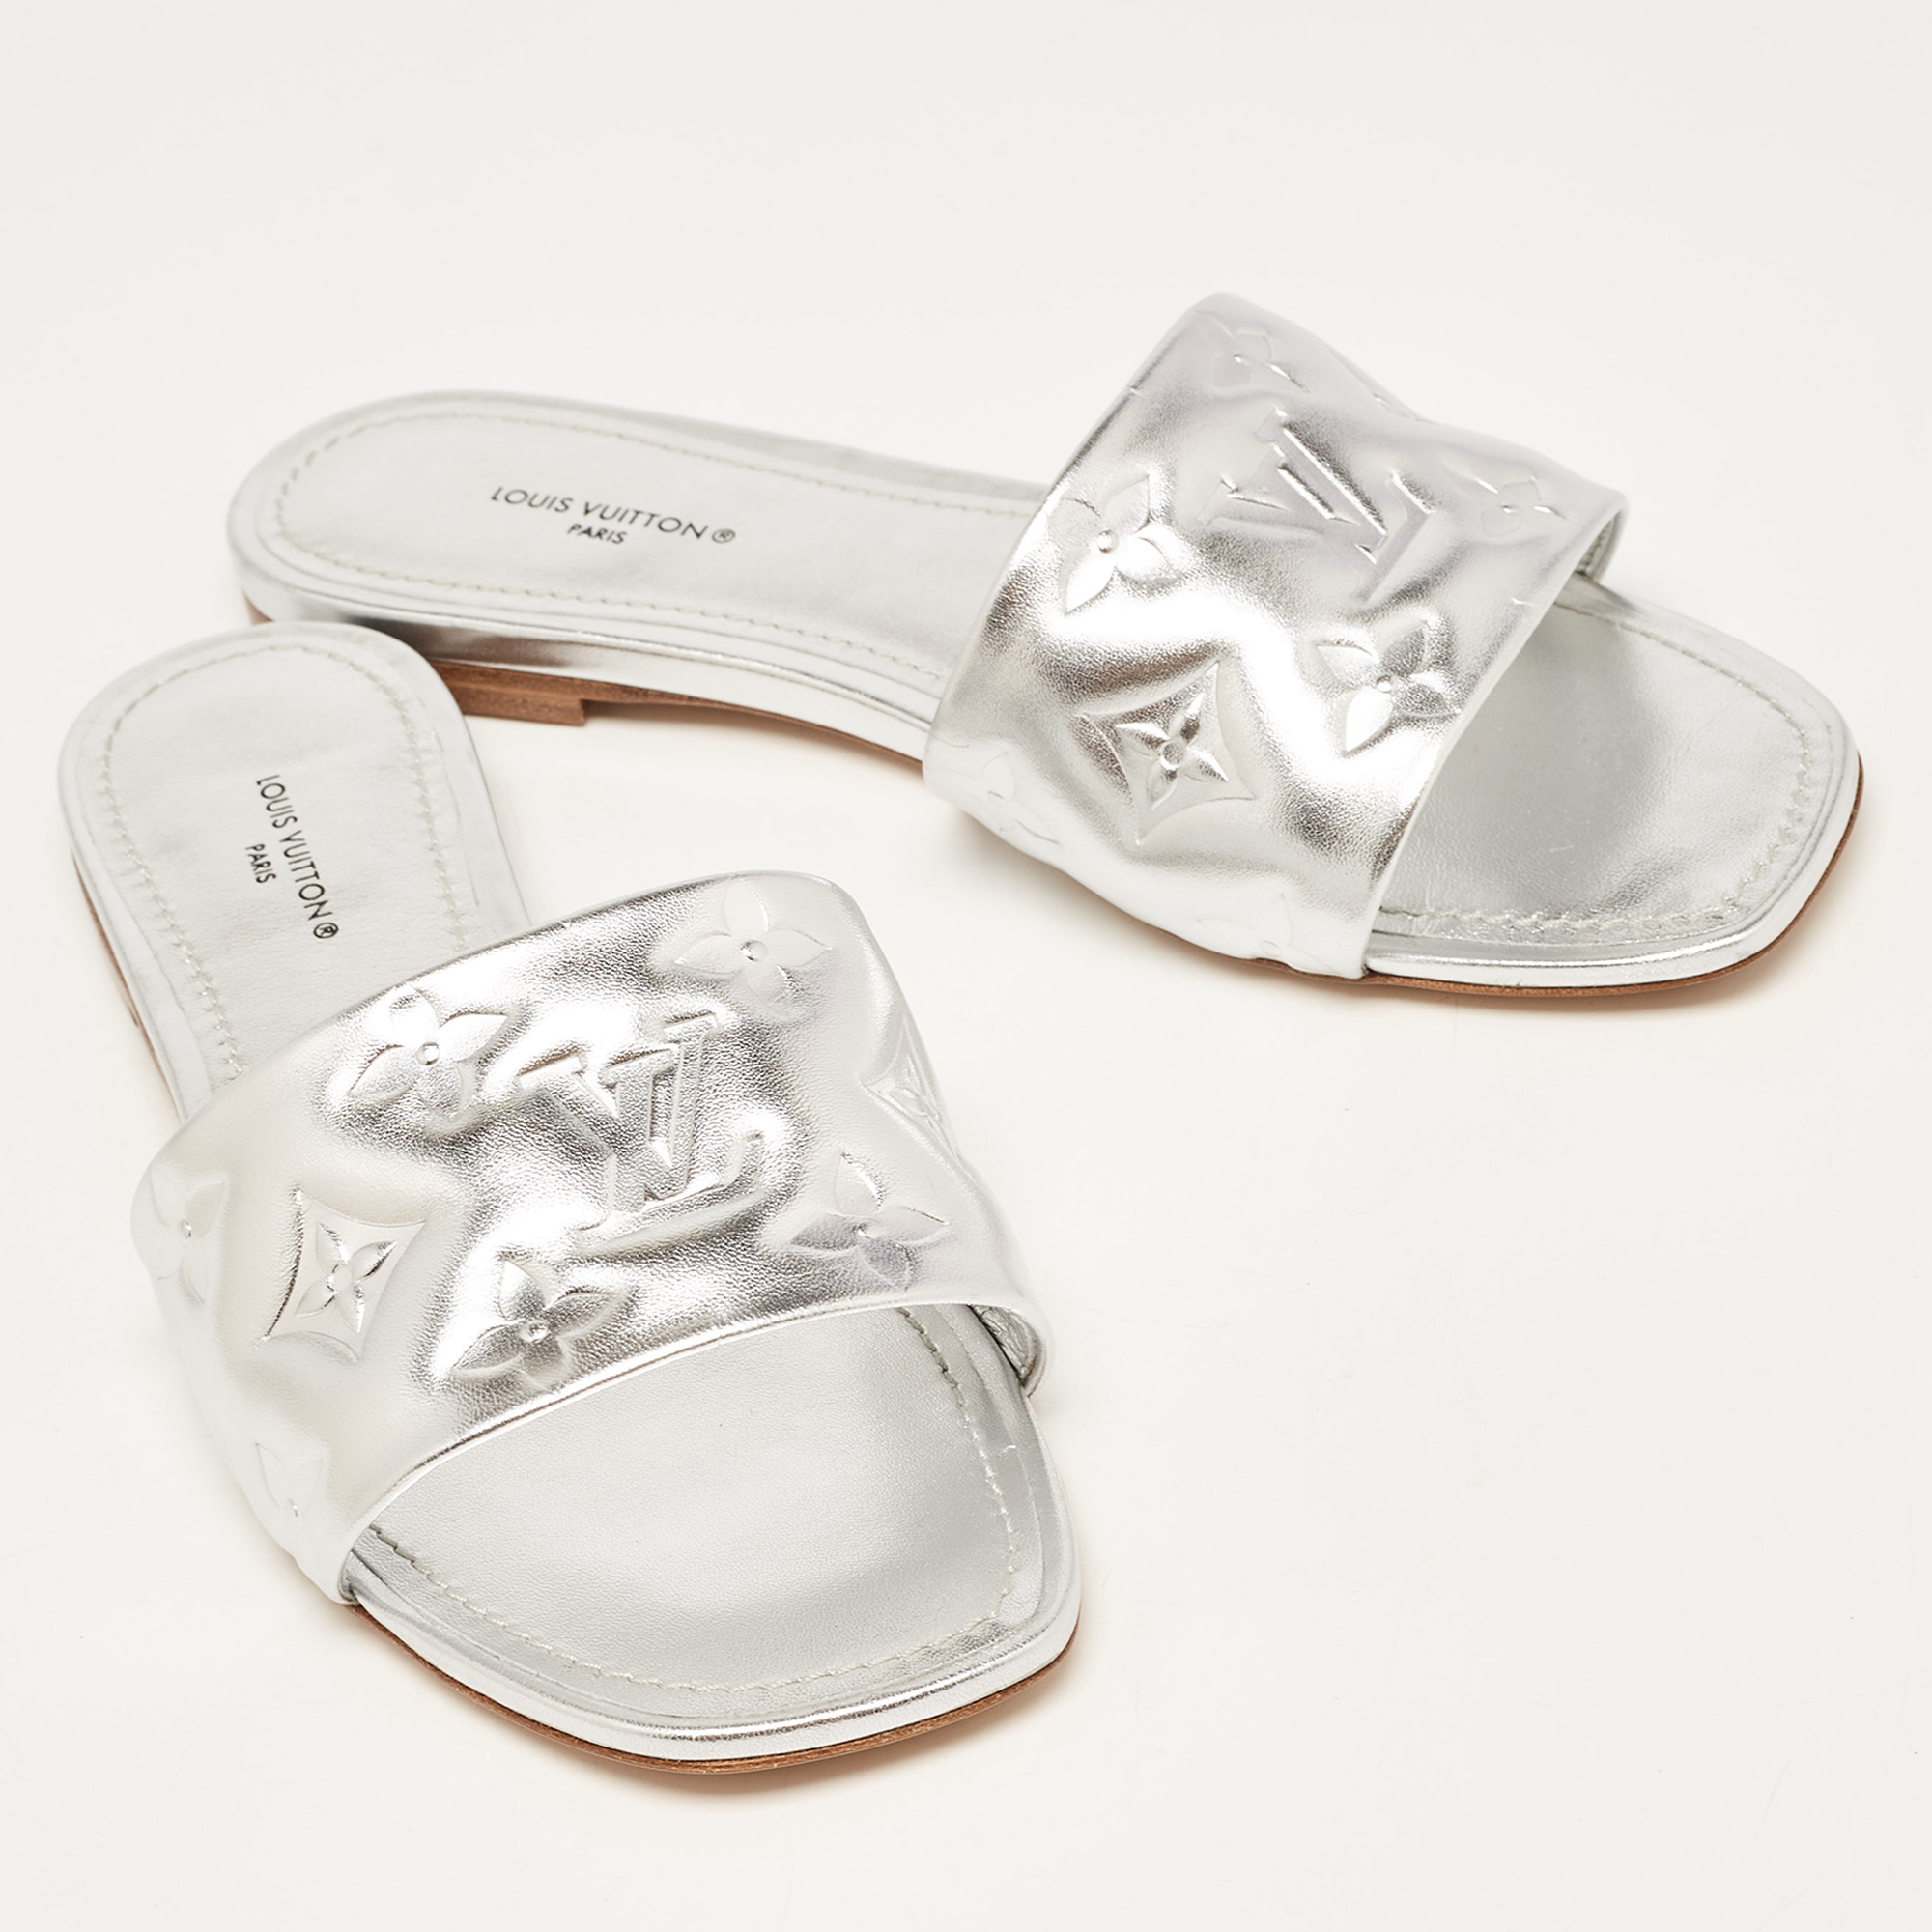 Louis Vuitton Silver Monogram Embossed Leather Revival Flat Slides Size 37